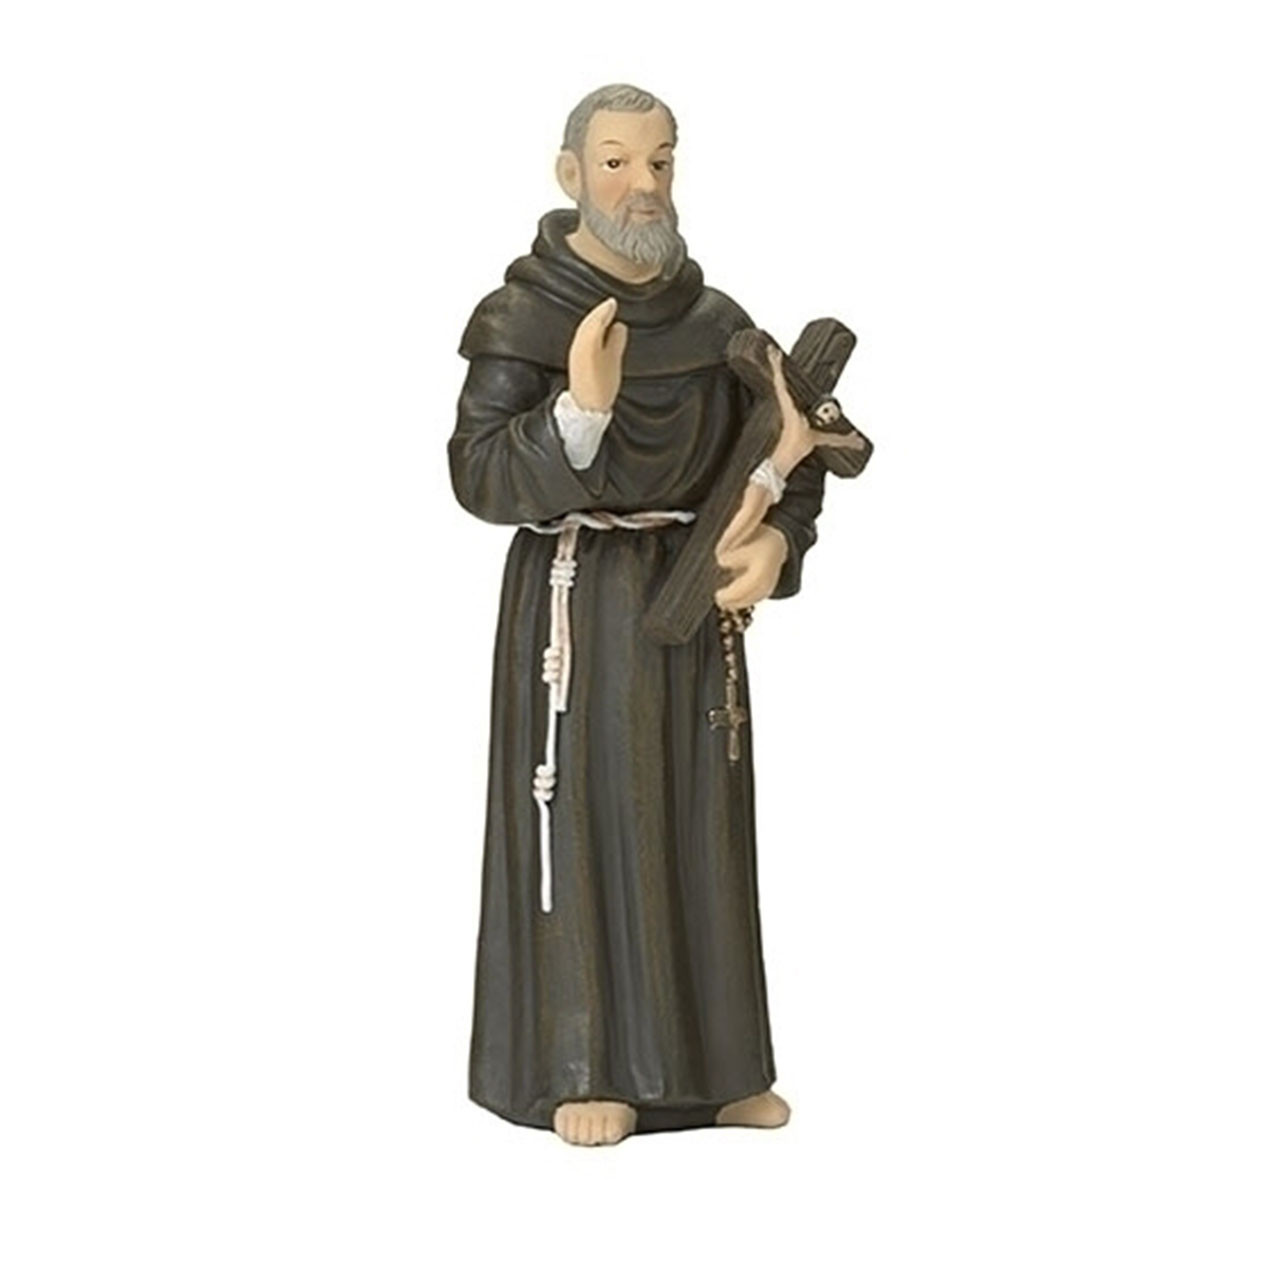 Detail photo of the 4 Inch Resin Padre Pio Statue